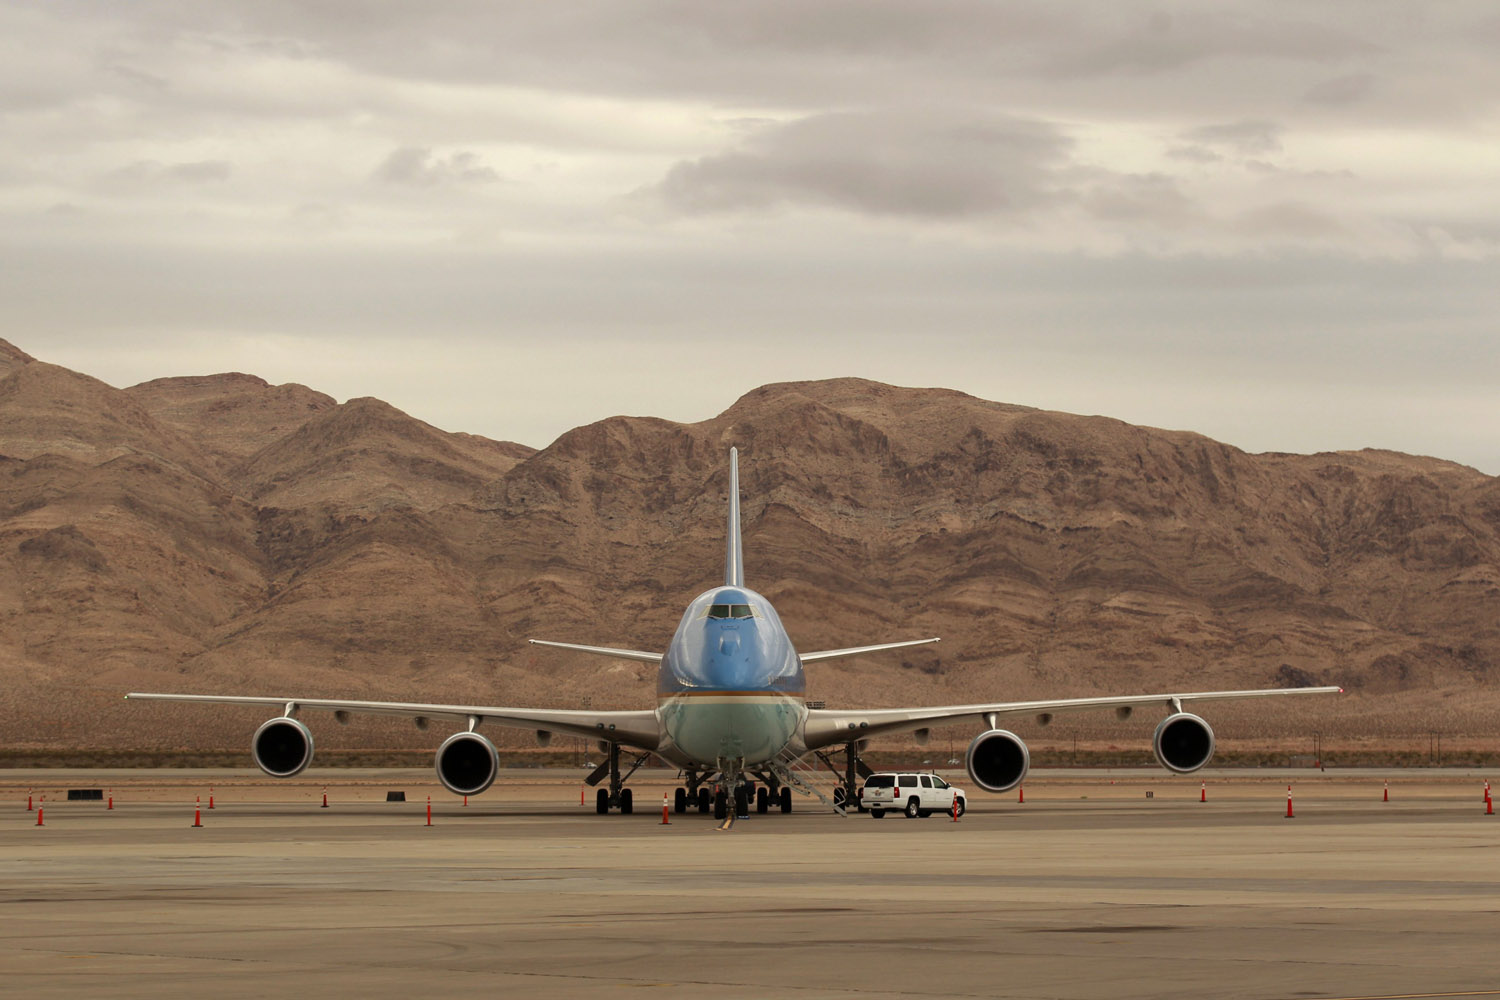 Aug. 22, 2012. Air Force One sits on the airport tarmac as U.S. President Barack Obama campaigns in Las Vegas.